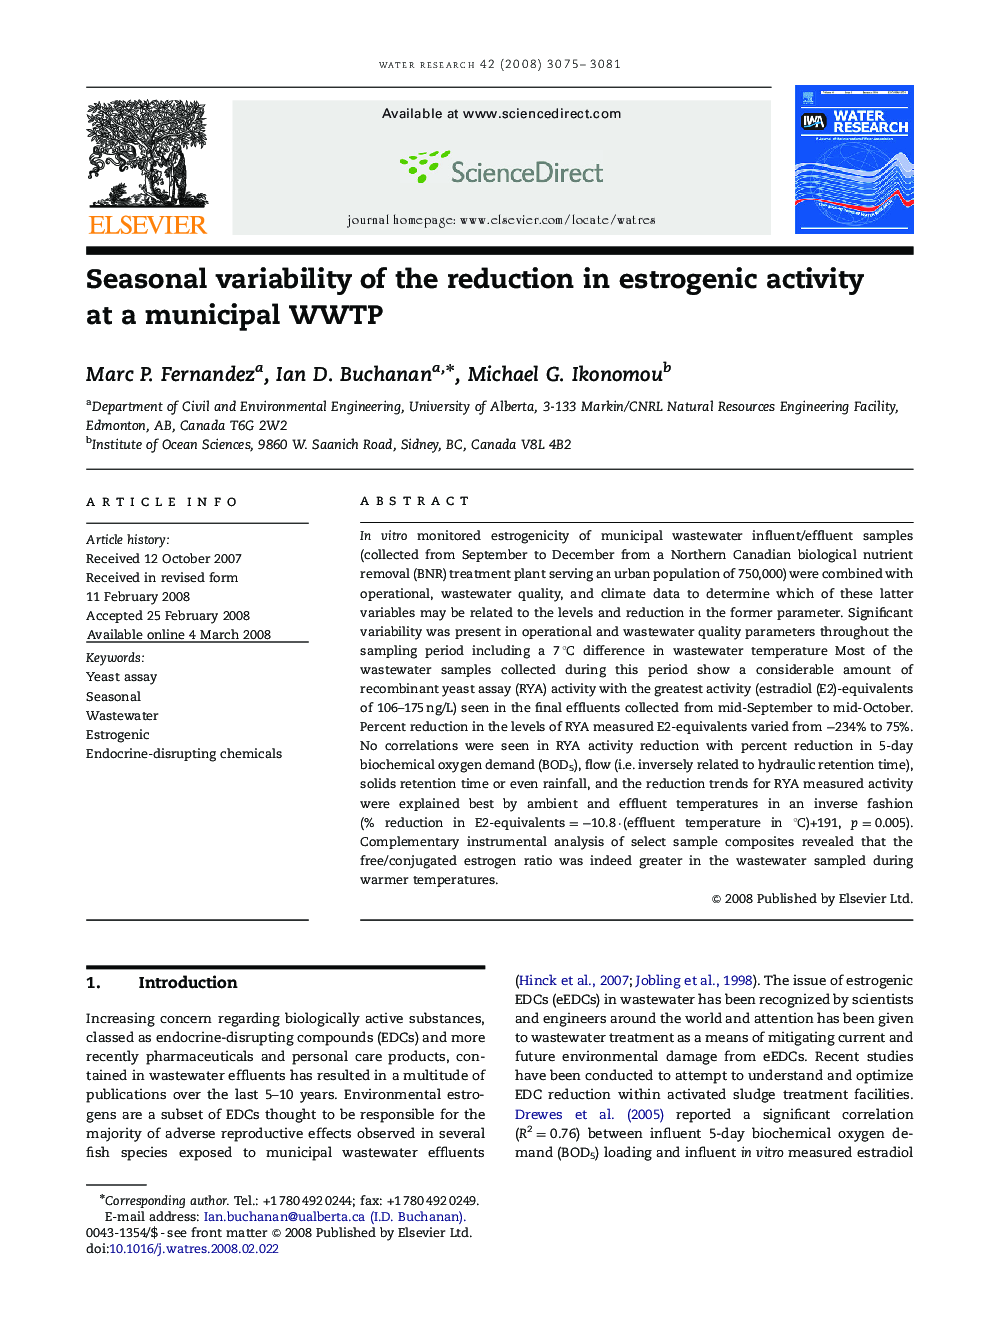 Seasonal variability of the reduction in estrogenic activity at a municipal WWTP